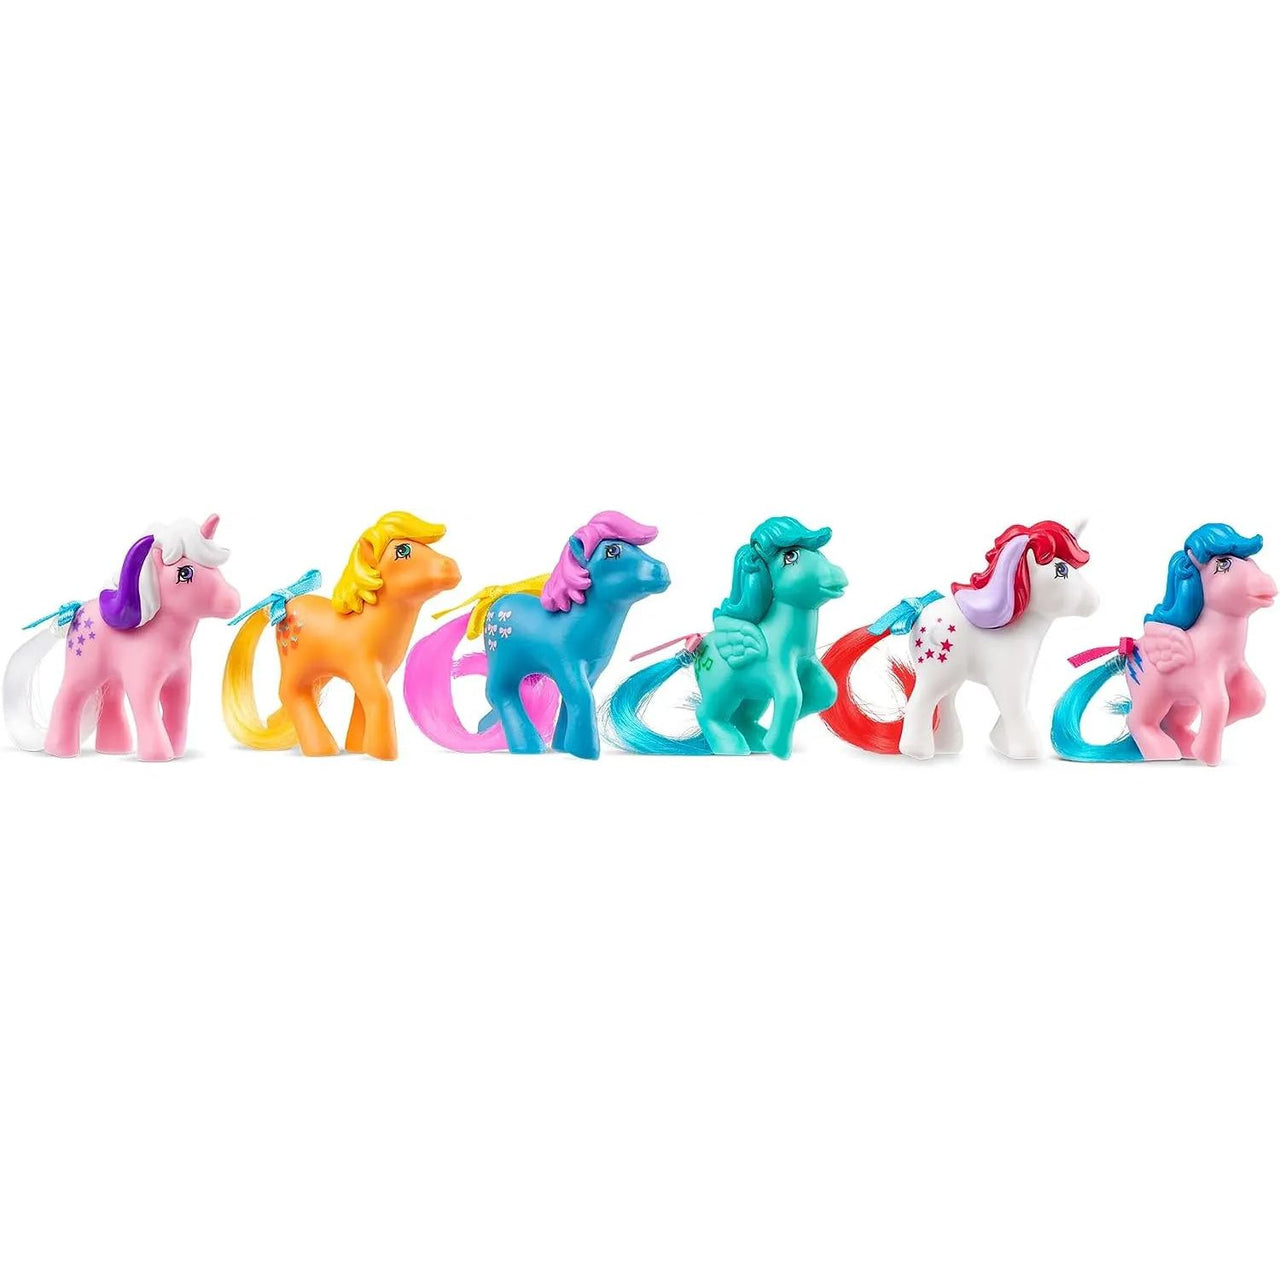 My Little Pony 40th Figure Collector Pack - Rescue at Midnight Castle My Little Pony